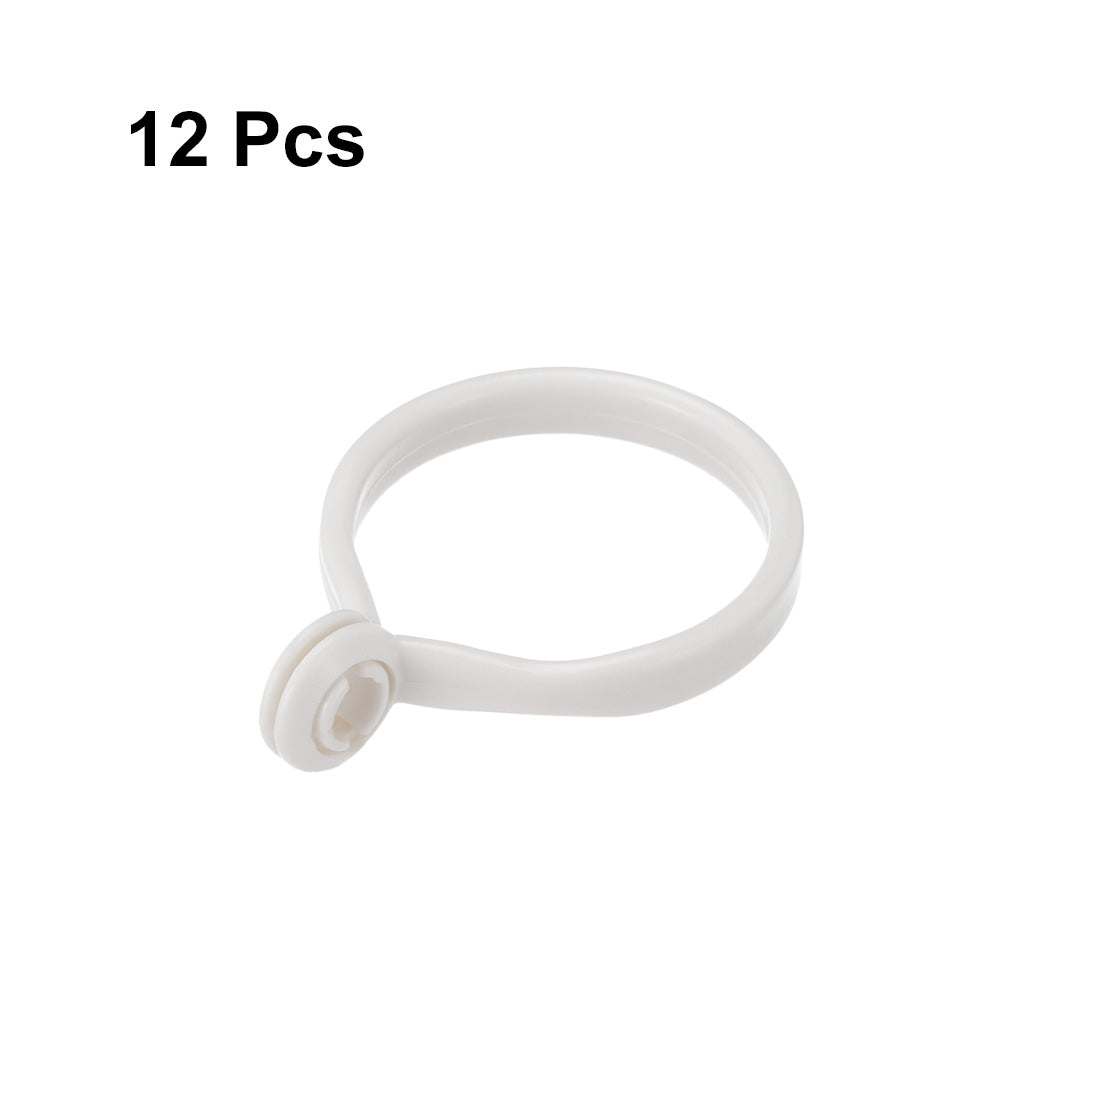 uxcell Uxcell Curtain Rings Plastic Drapery Ring with Snap Closure for Curtain Rods White 12 Pcs